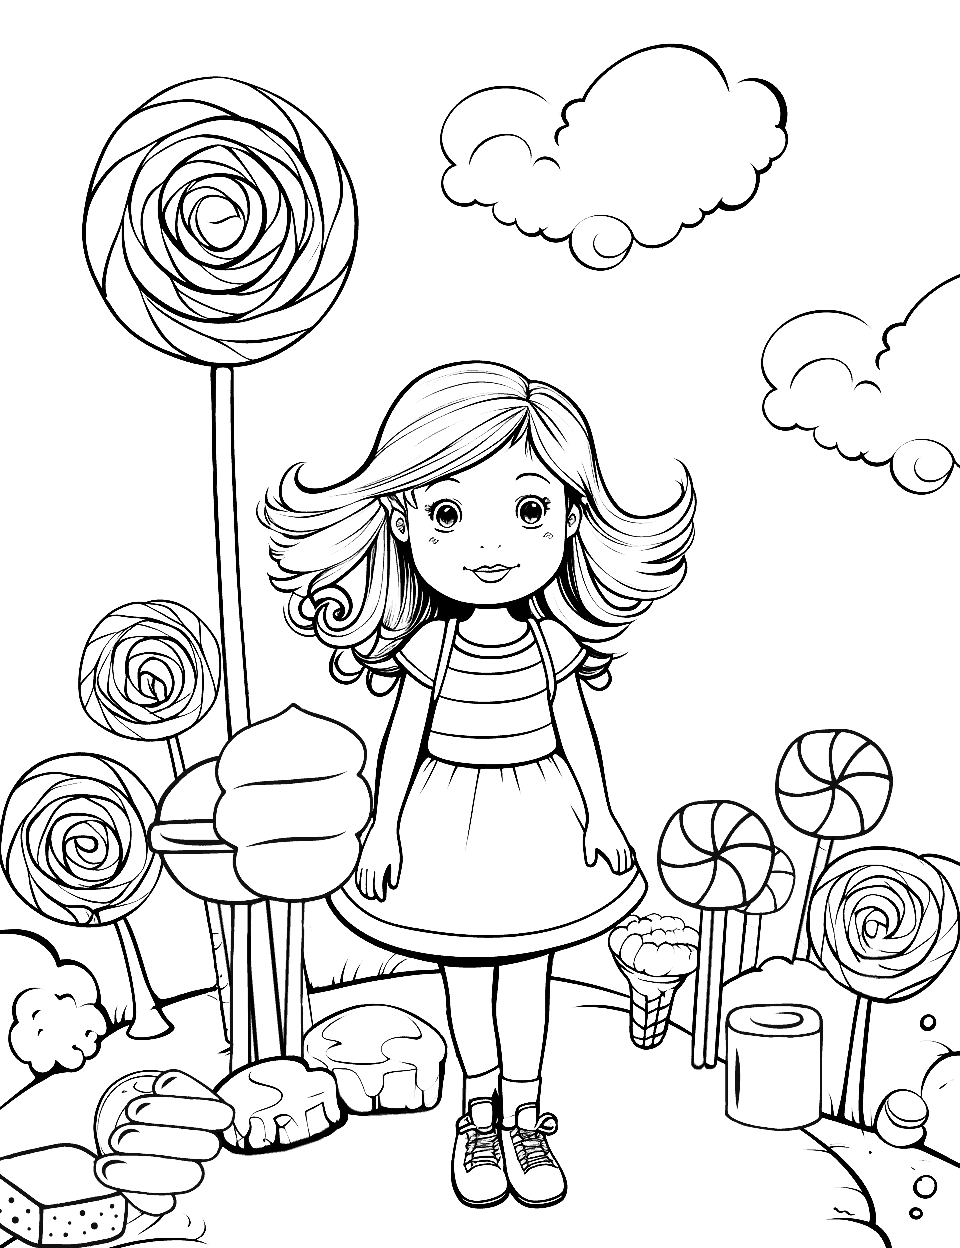 Kid in a Candy World Coloring Page - A young girl exploring a magical world made entirely of candy.